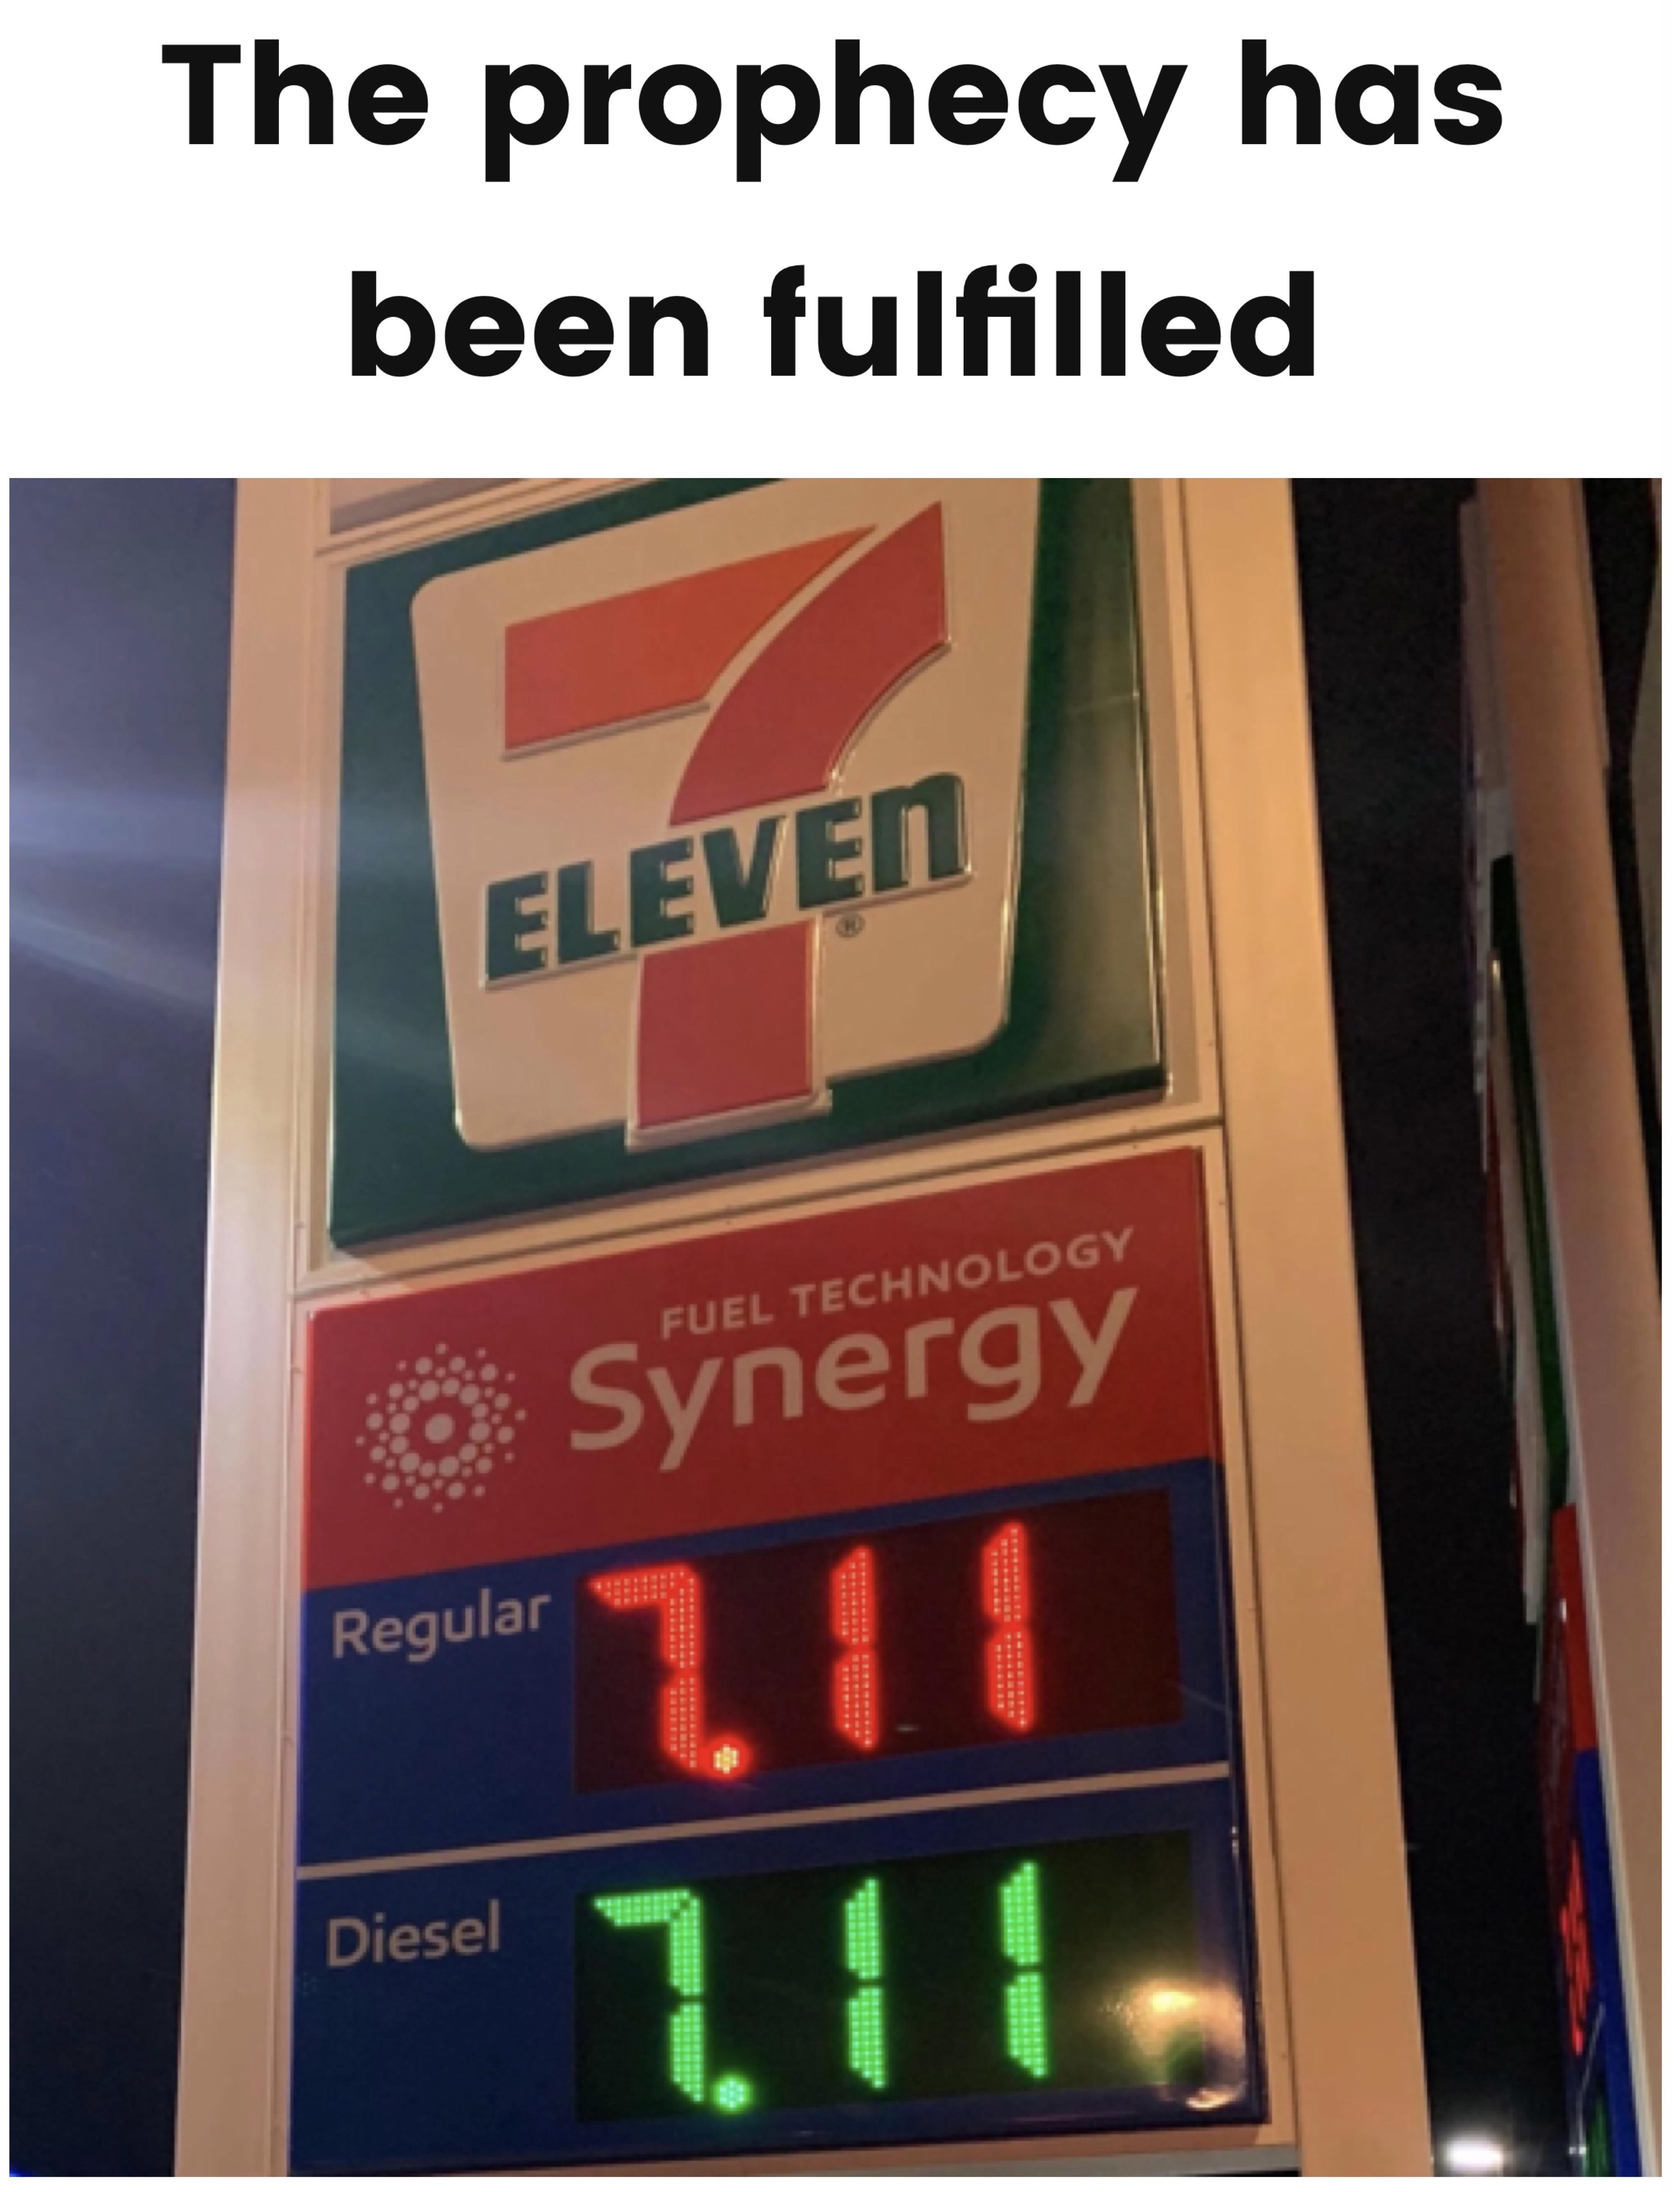 dank memes - funny memes - 7 eleven - The prophecy has been fulfilled Eleven Fuel Technology Synergy 7.11 Regular Diesel